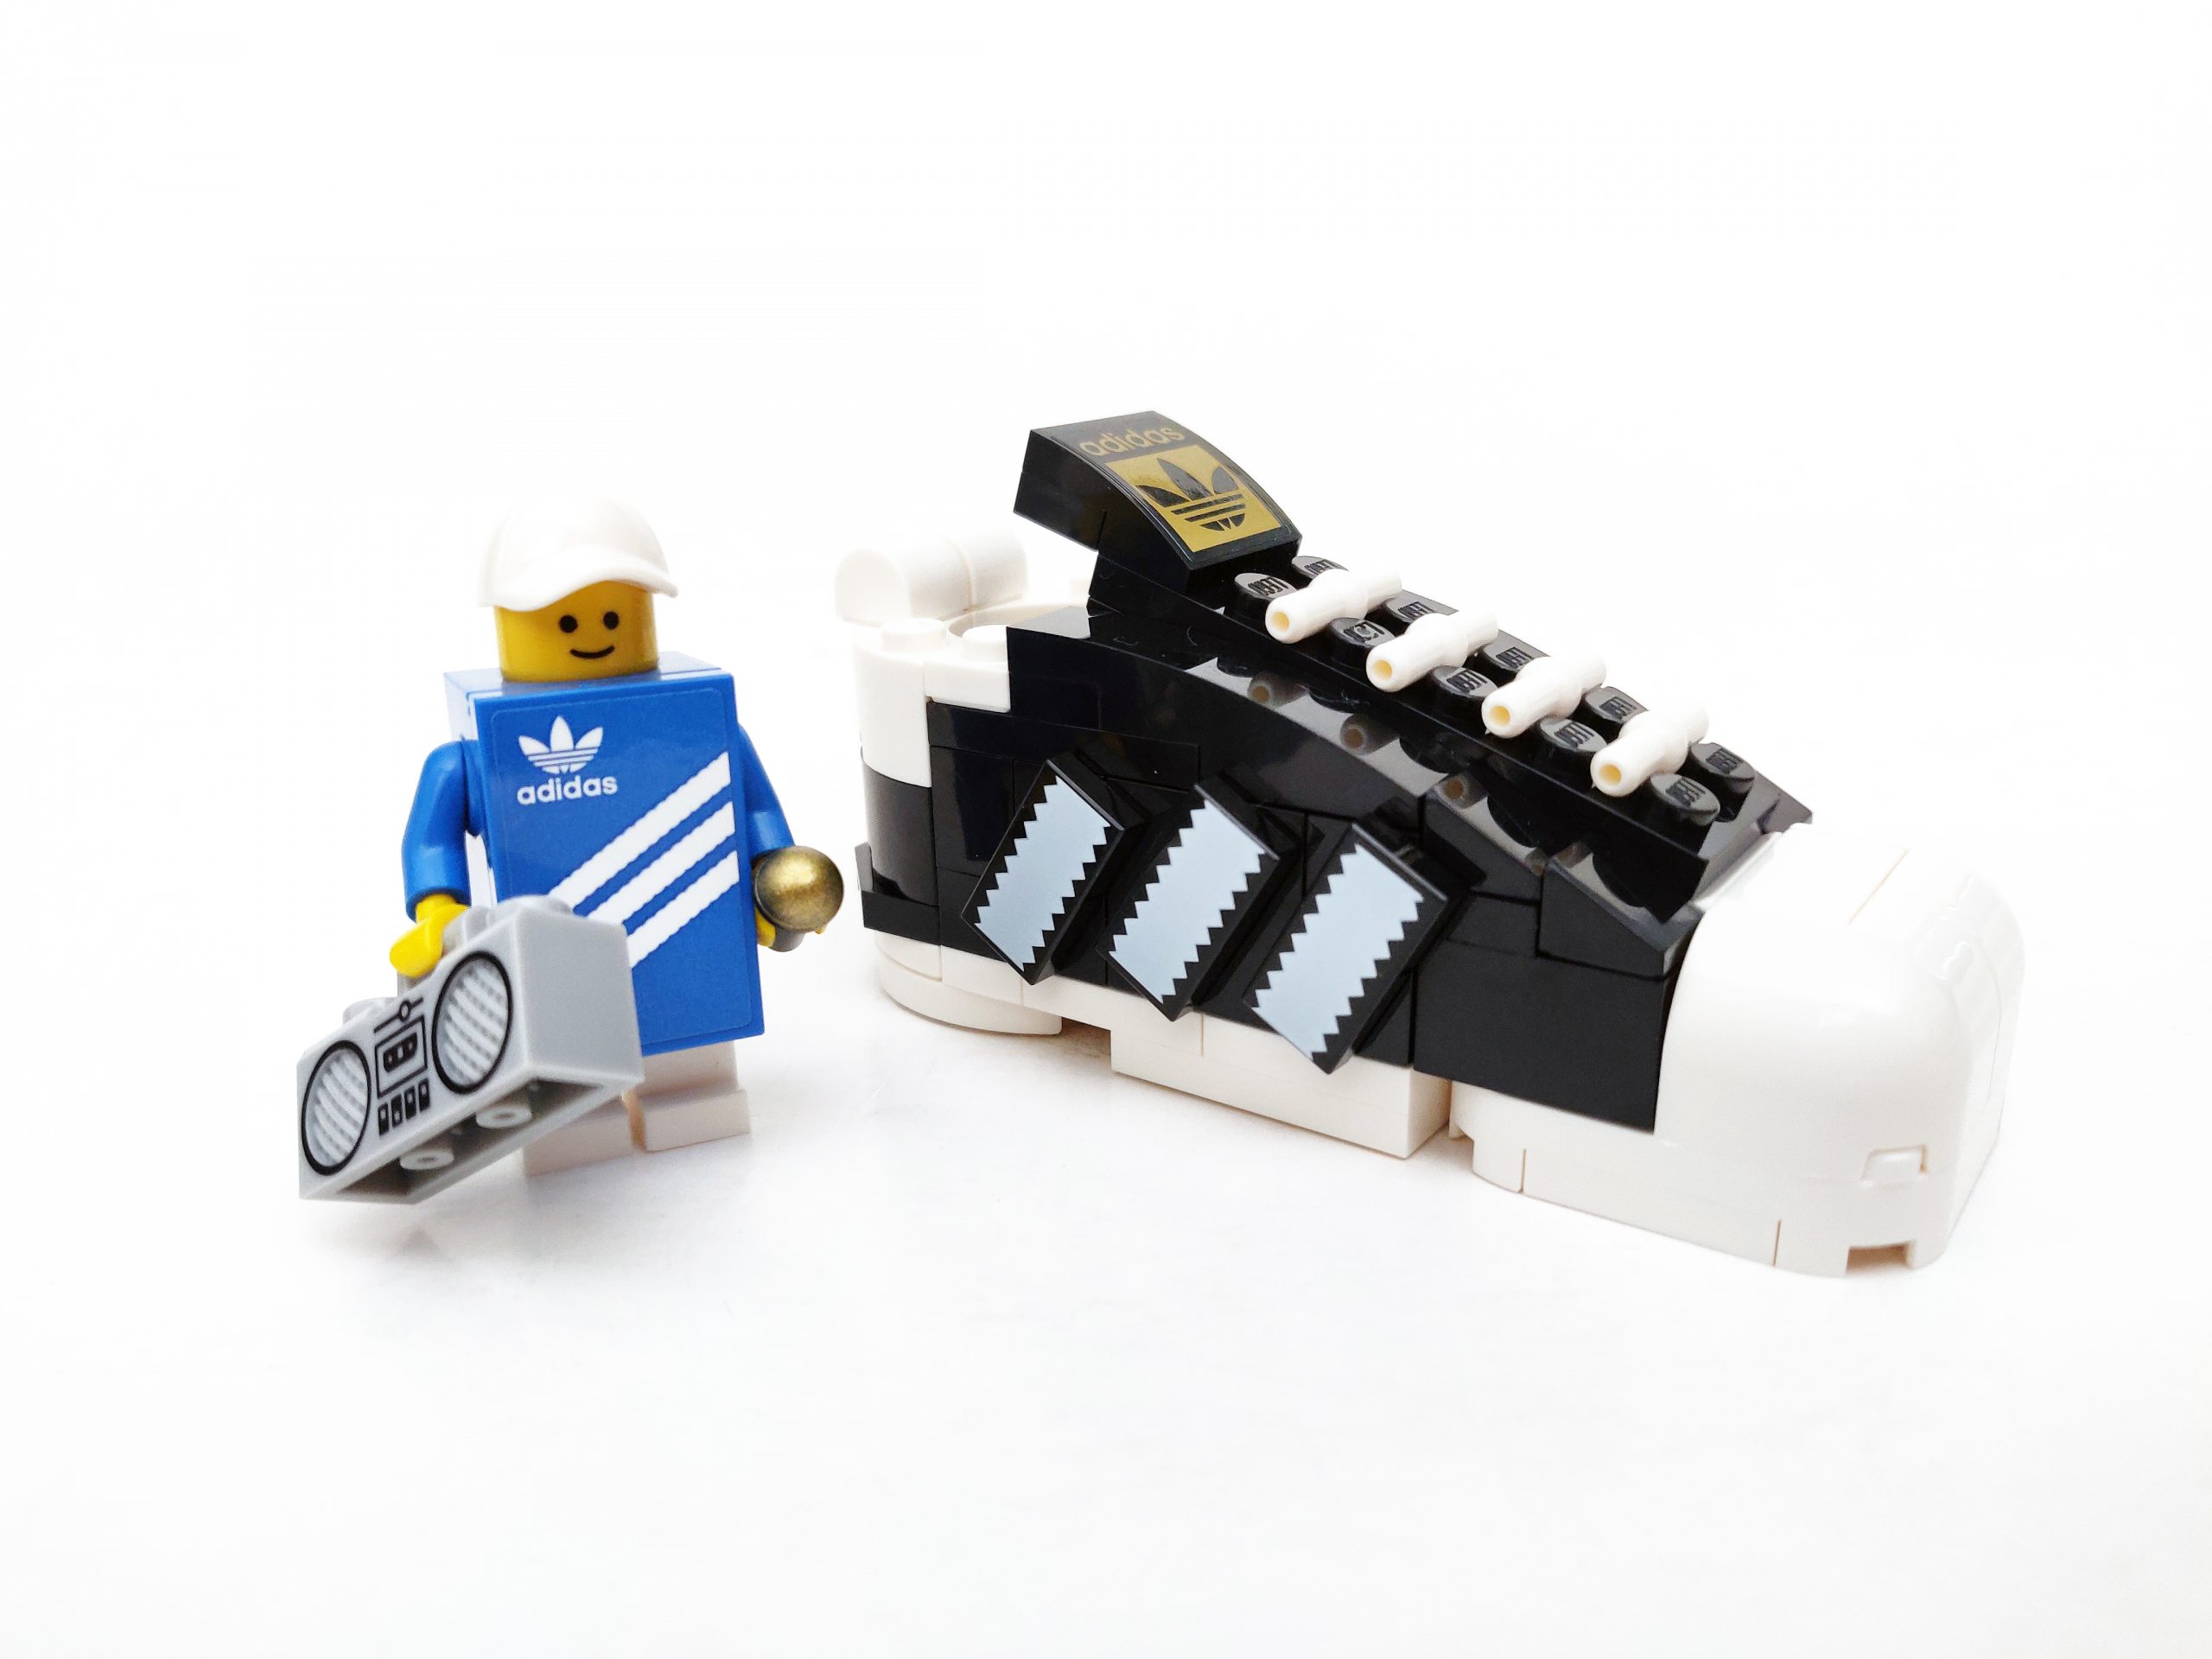 Adidas and Lego team up for a buildable Lego Superstar brick model